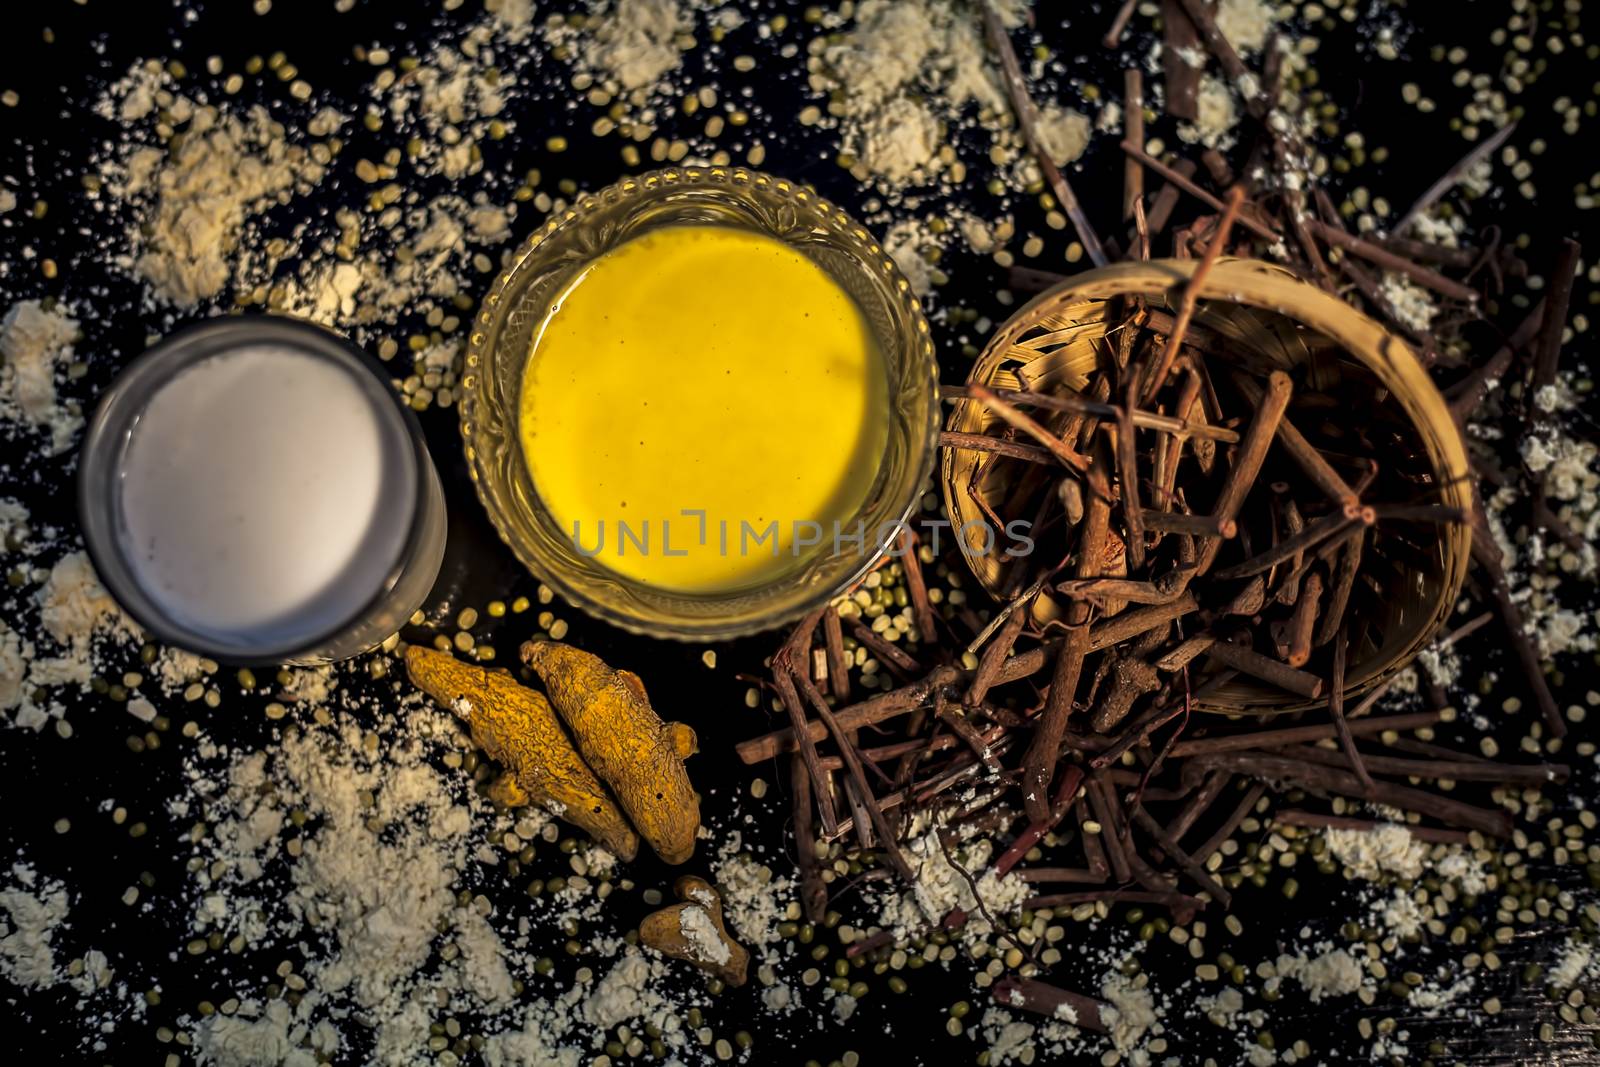 Ayurvedic blood purifier and skin glow face mask consisting of Manjistha, mung bean, haldi/turmeric, and milk. Horizontal shot of face mask with entire constituents with it on a black surface. by mirzamlk